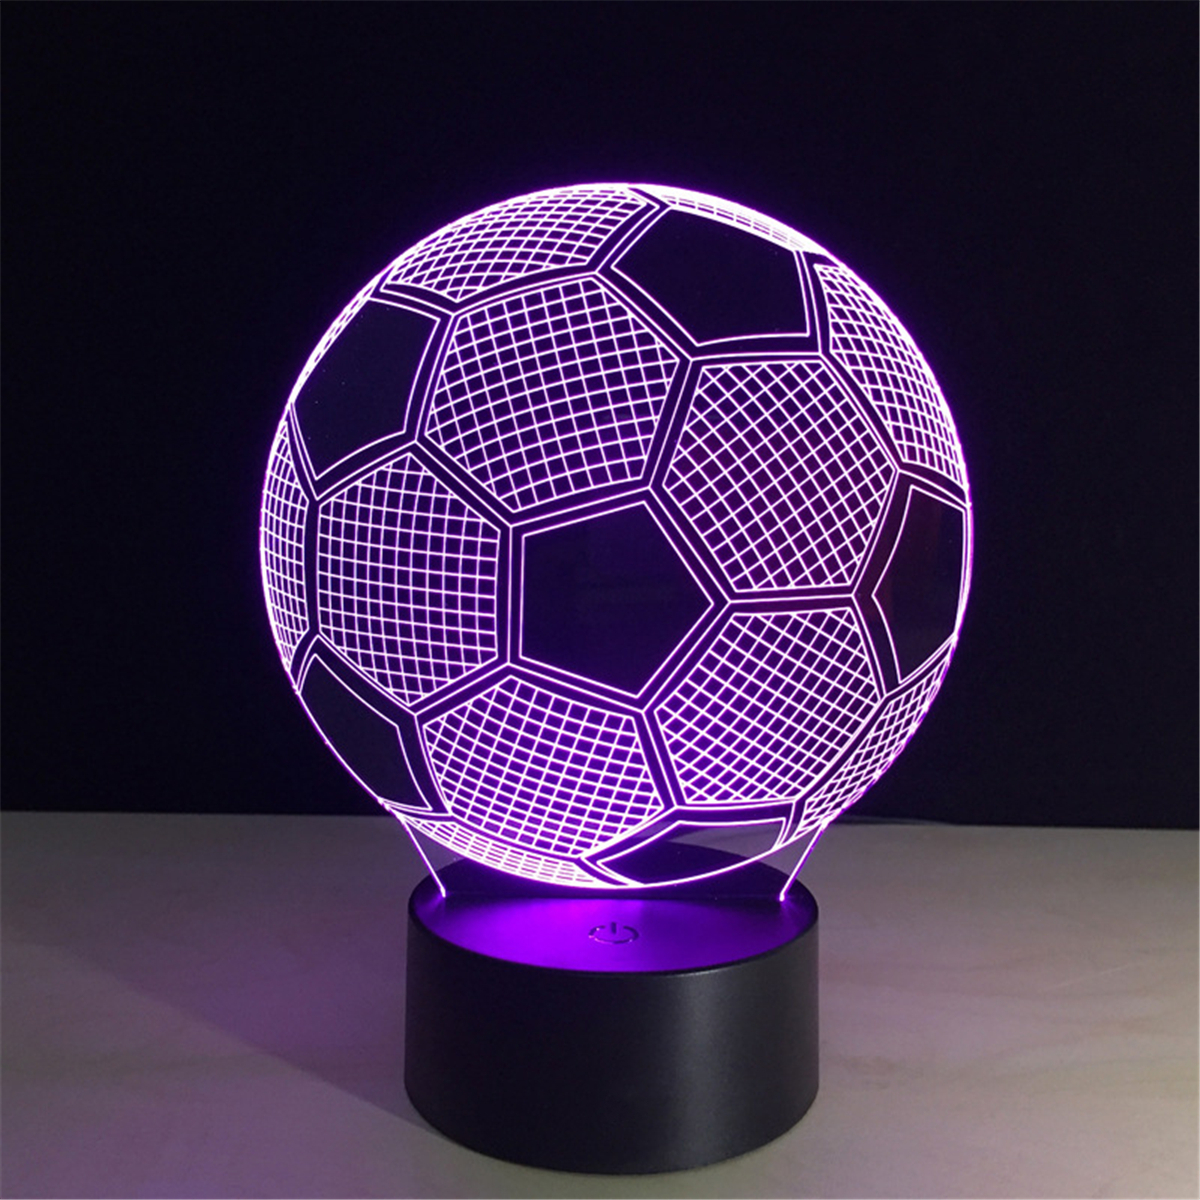 

5V 3W 3D LED Fooball Night Light 7 Colors Touch Switch Remote Control Desk Room Lamp